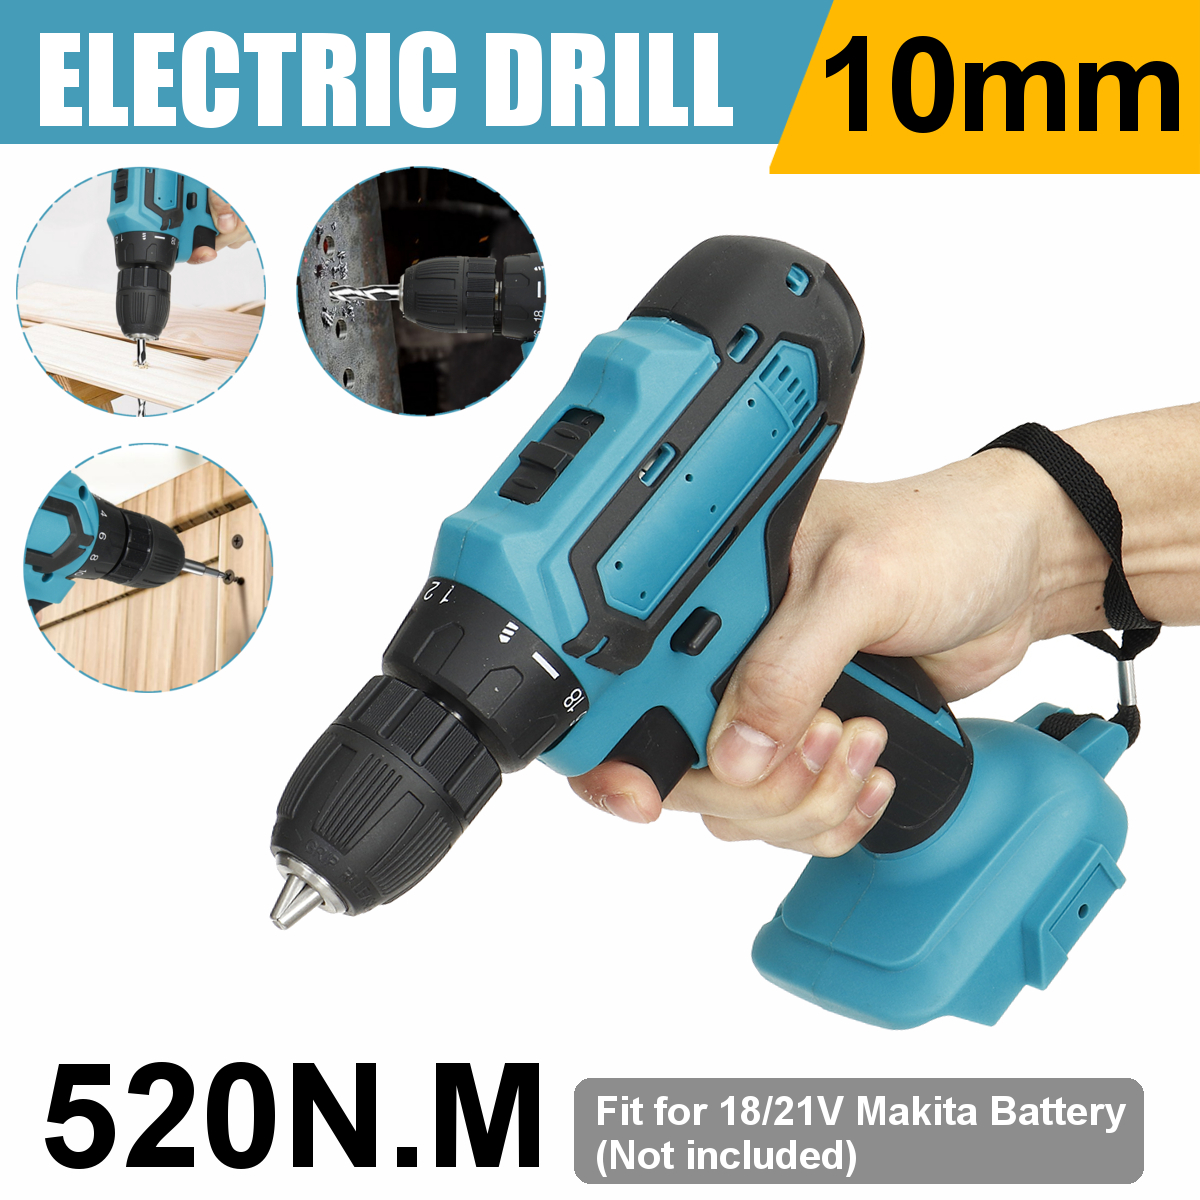 10mm-Chuck-520Nm-Cordless-Electric-Drill-Driver-Replacement-for-Makita-18V21V-Battery-1789711-1